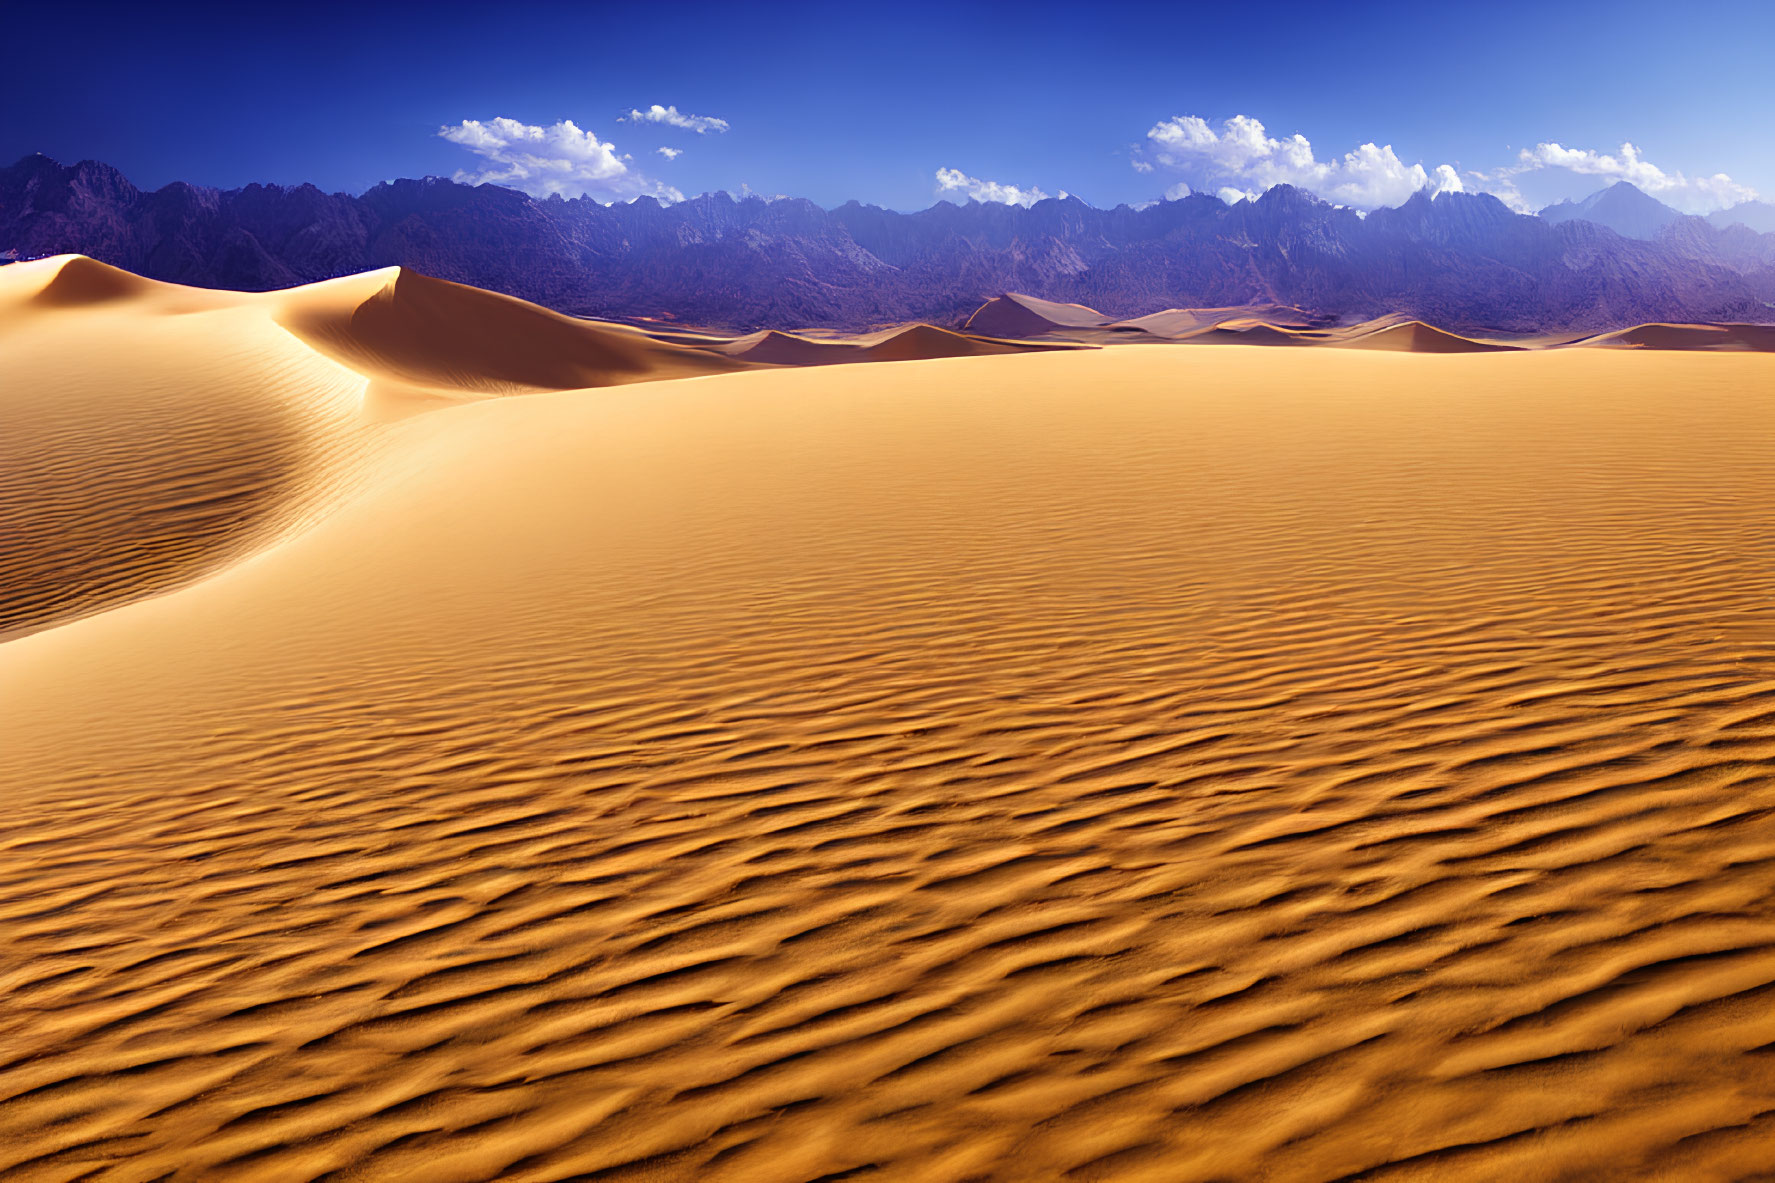 Ripple-patterned golden sand dunes and rugged mountains under a blue sky